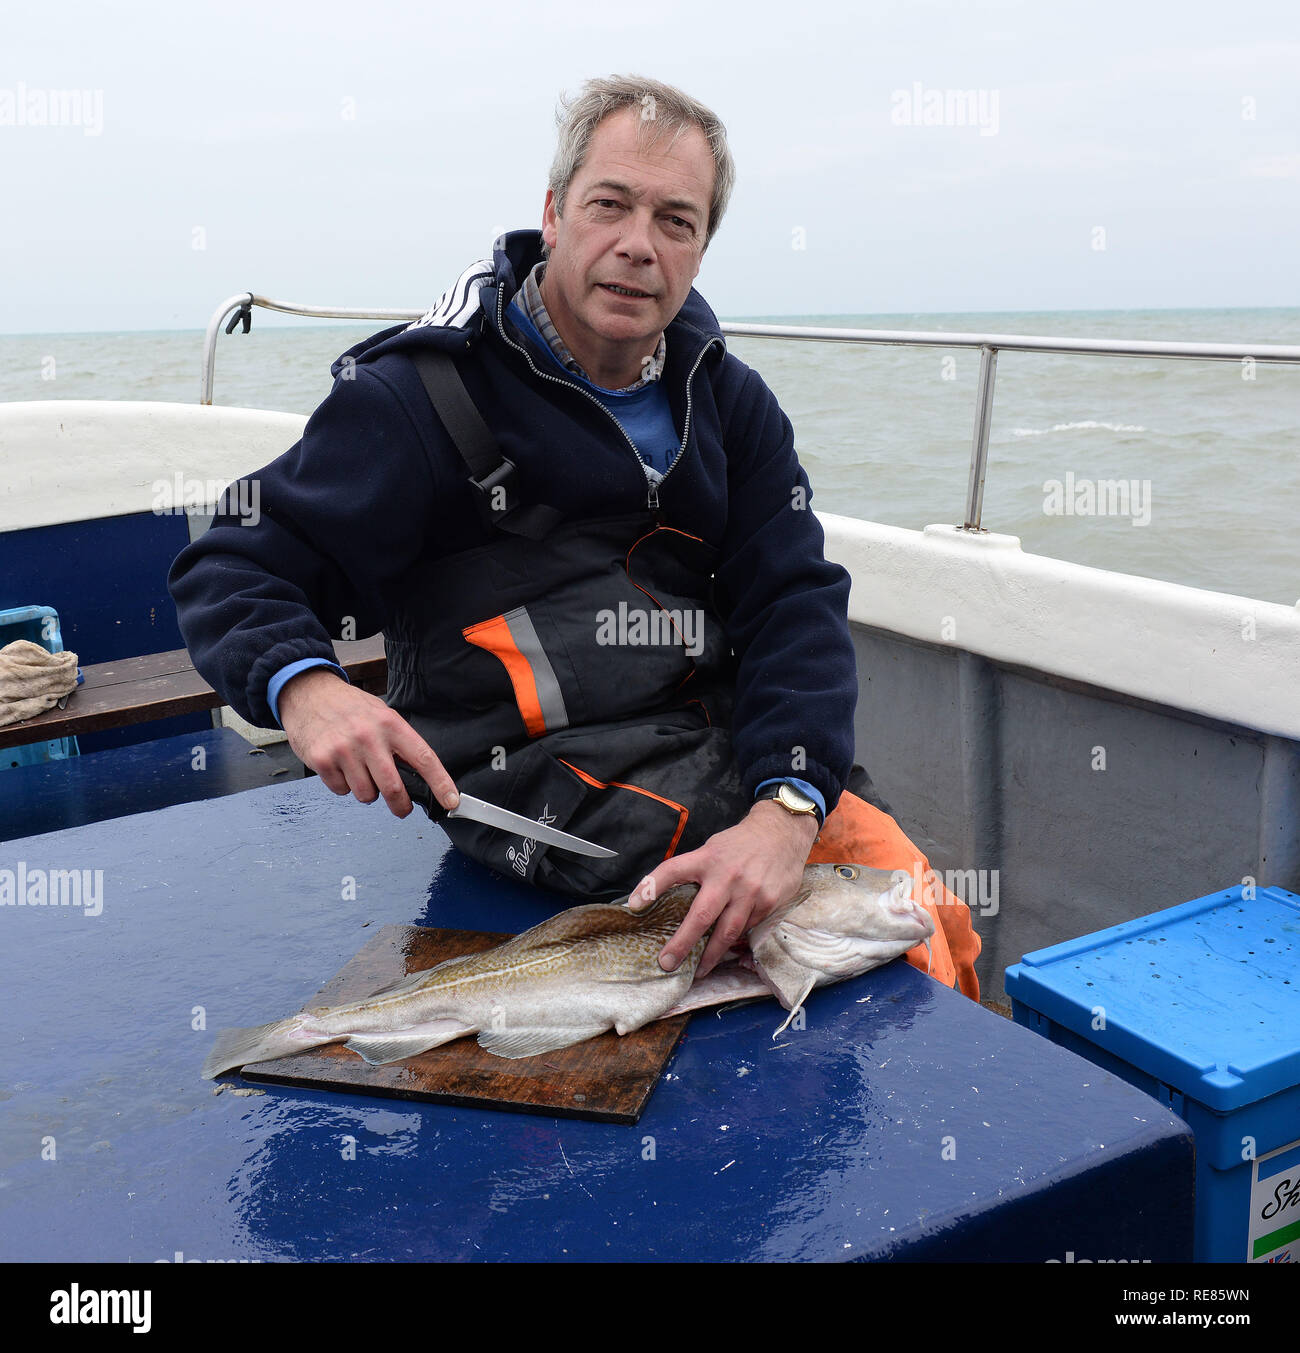 Acting UKIP leader Nigel Farage shows a different side from politics and  campaigning as he takes a break and relaxes on a day&#39;s fishing trip off the  Kent coast. Featuring: Nigel Farage